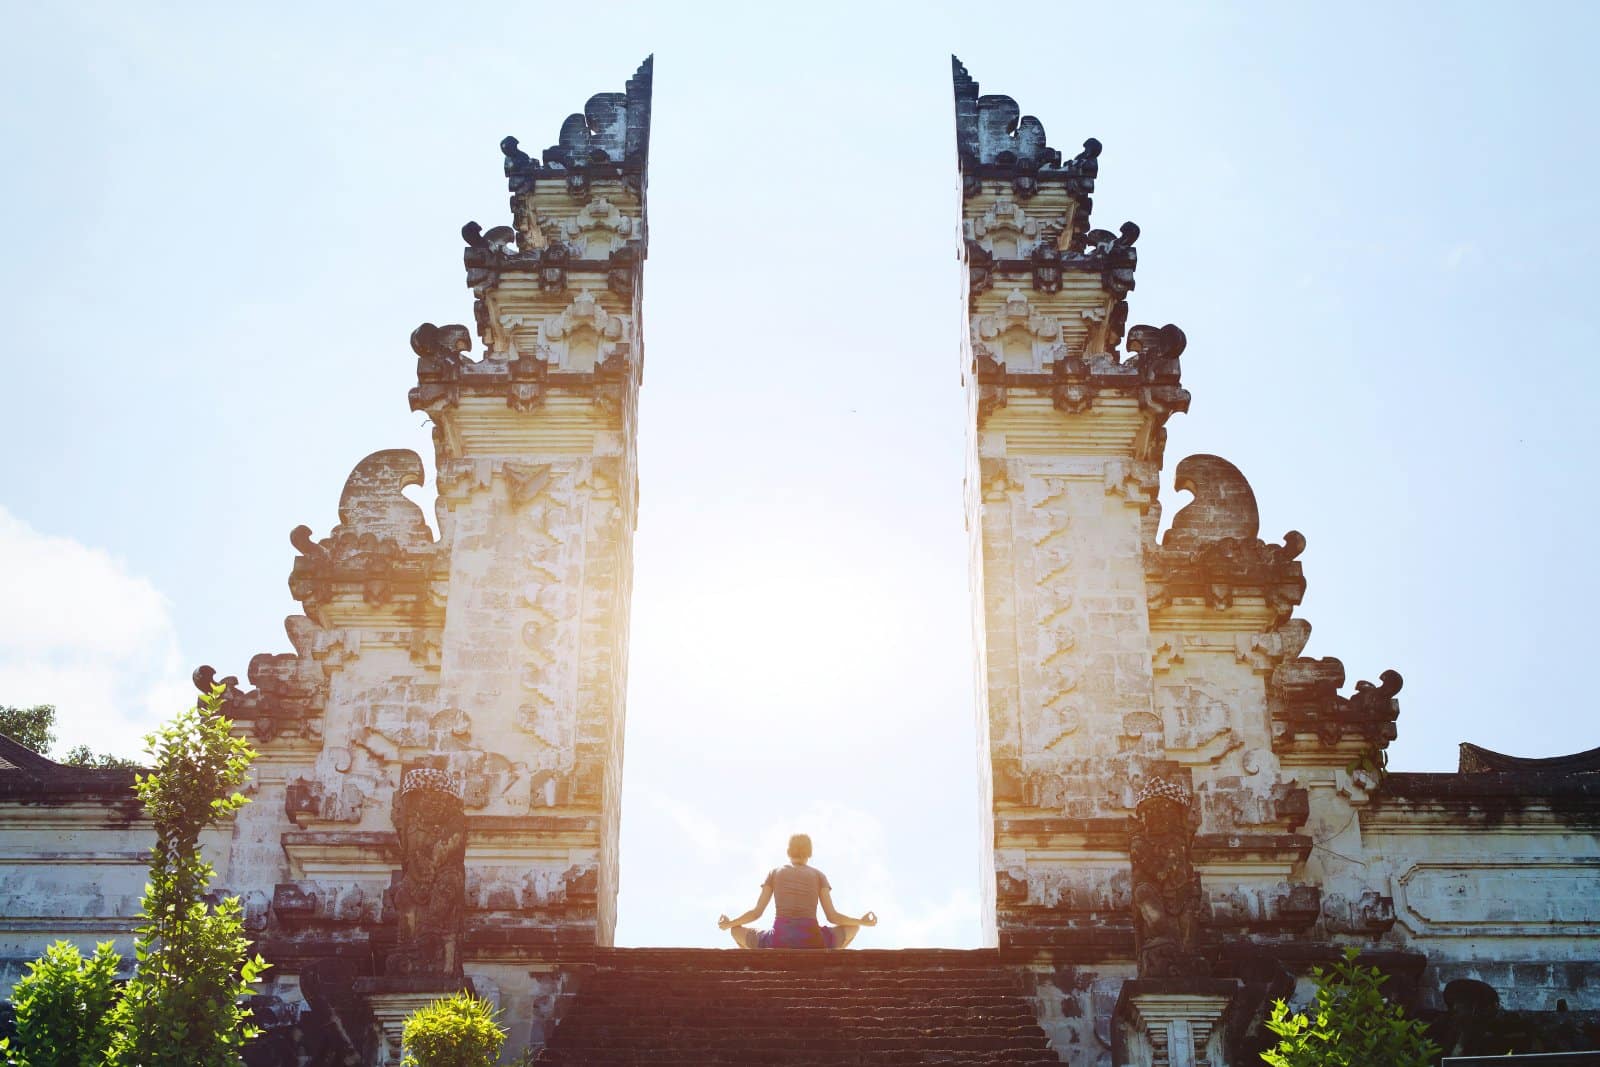 <p class="wp-caption-text">Image Credit: Shutterstock / Song_about_summer</p>  <p>Bali is beautiful, but its popularity has led to overcrowding and a loss of the peaceful island vibe it once had, with many spots feeling tailored solely for tourists.</p>